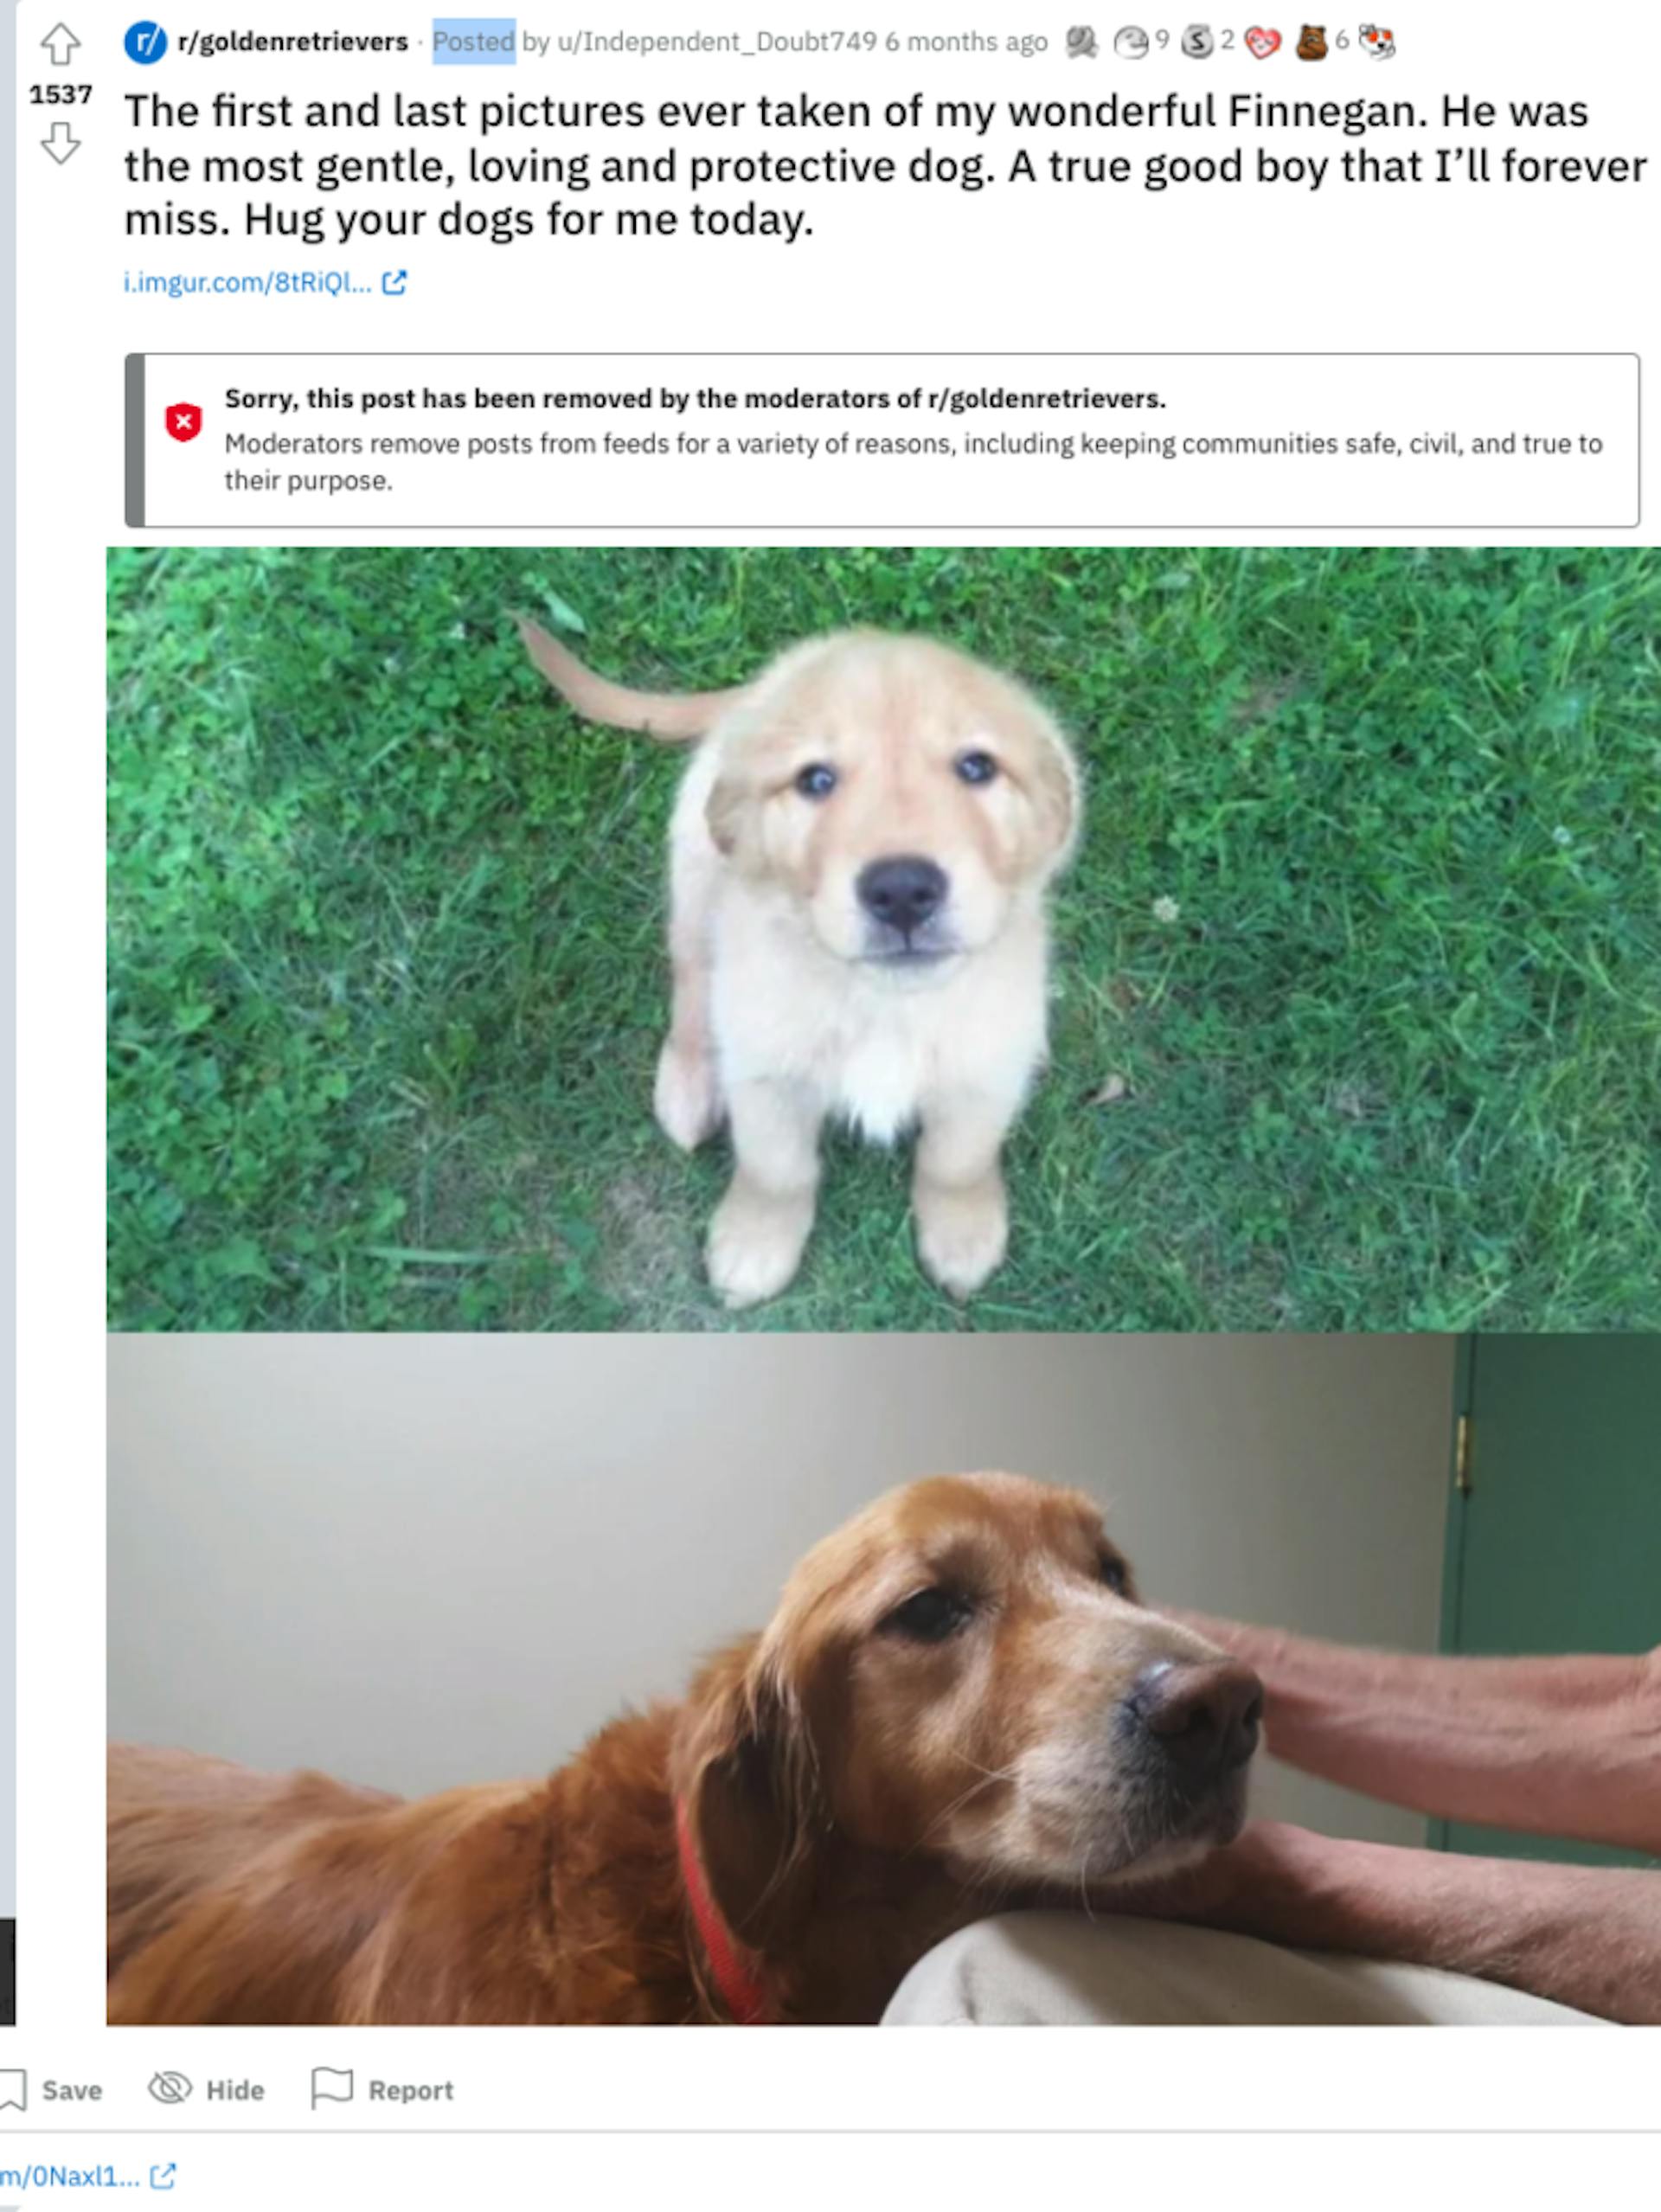 Moderator-removed reposts, like this one from r/goldenretrievers, are still visible on the site in moderators' comment histories.